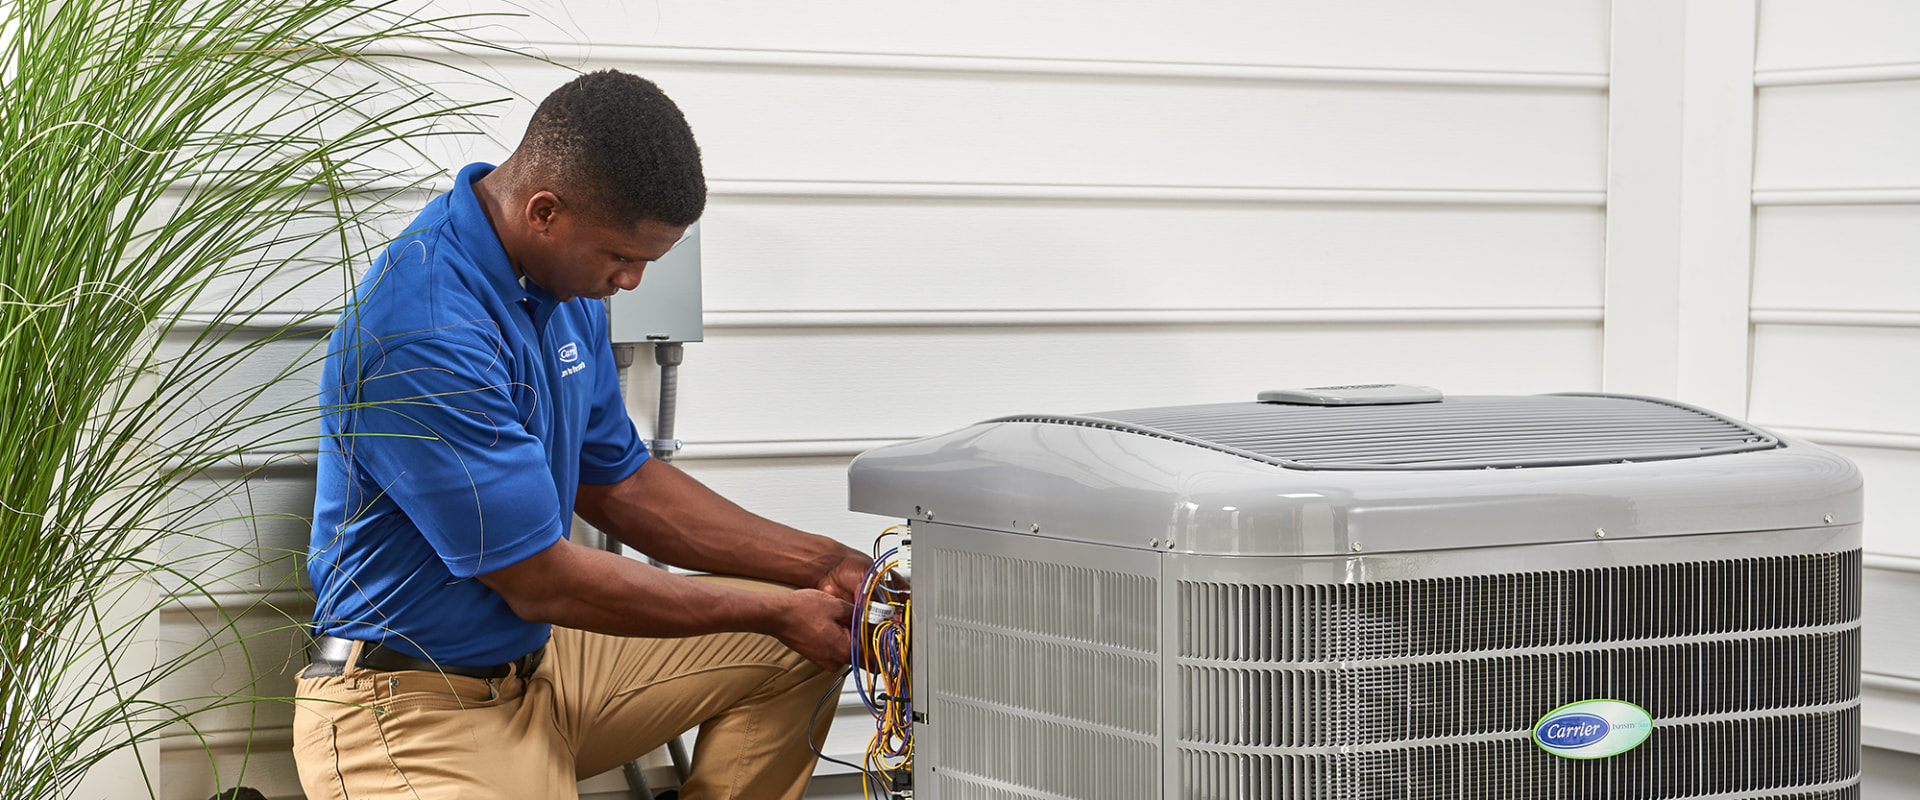 How Long Should Your HVAC System Last?